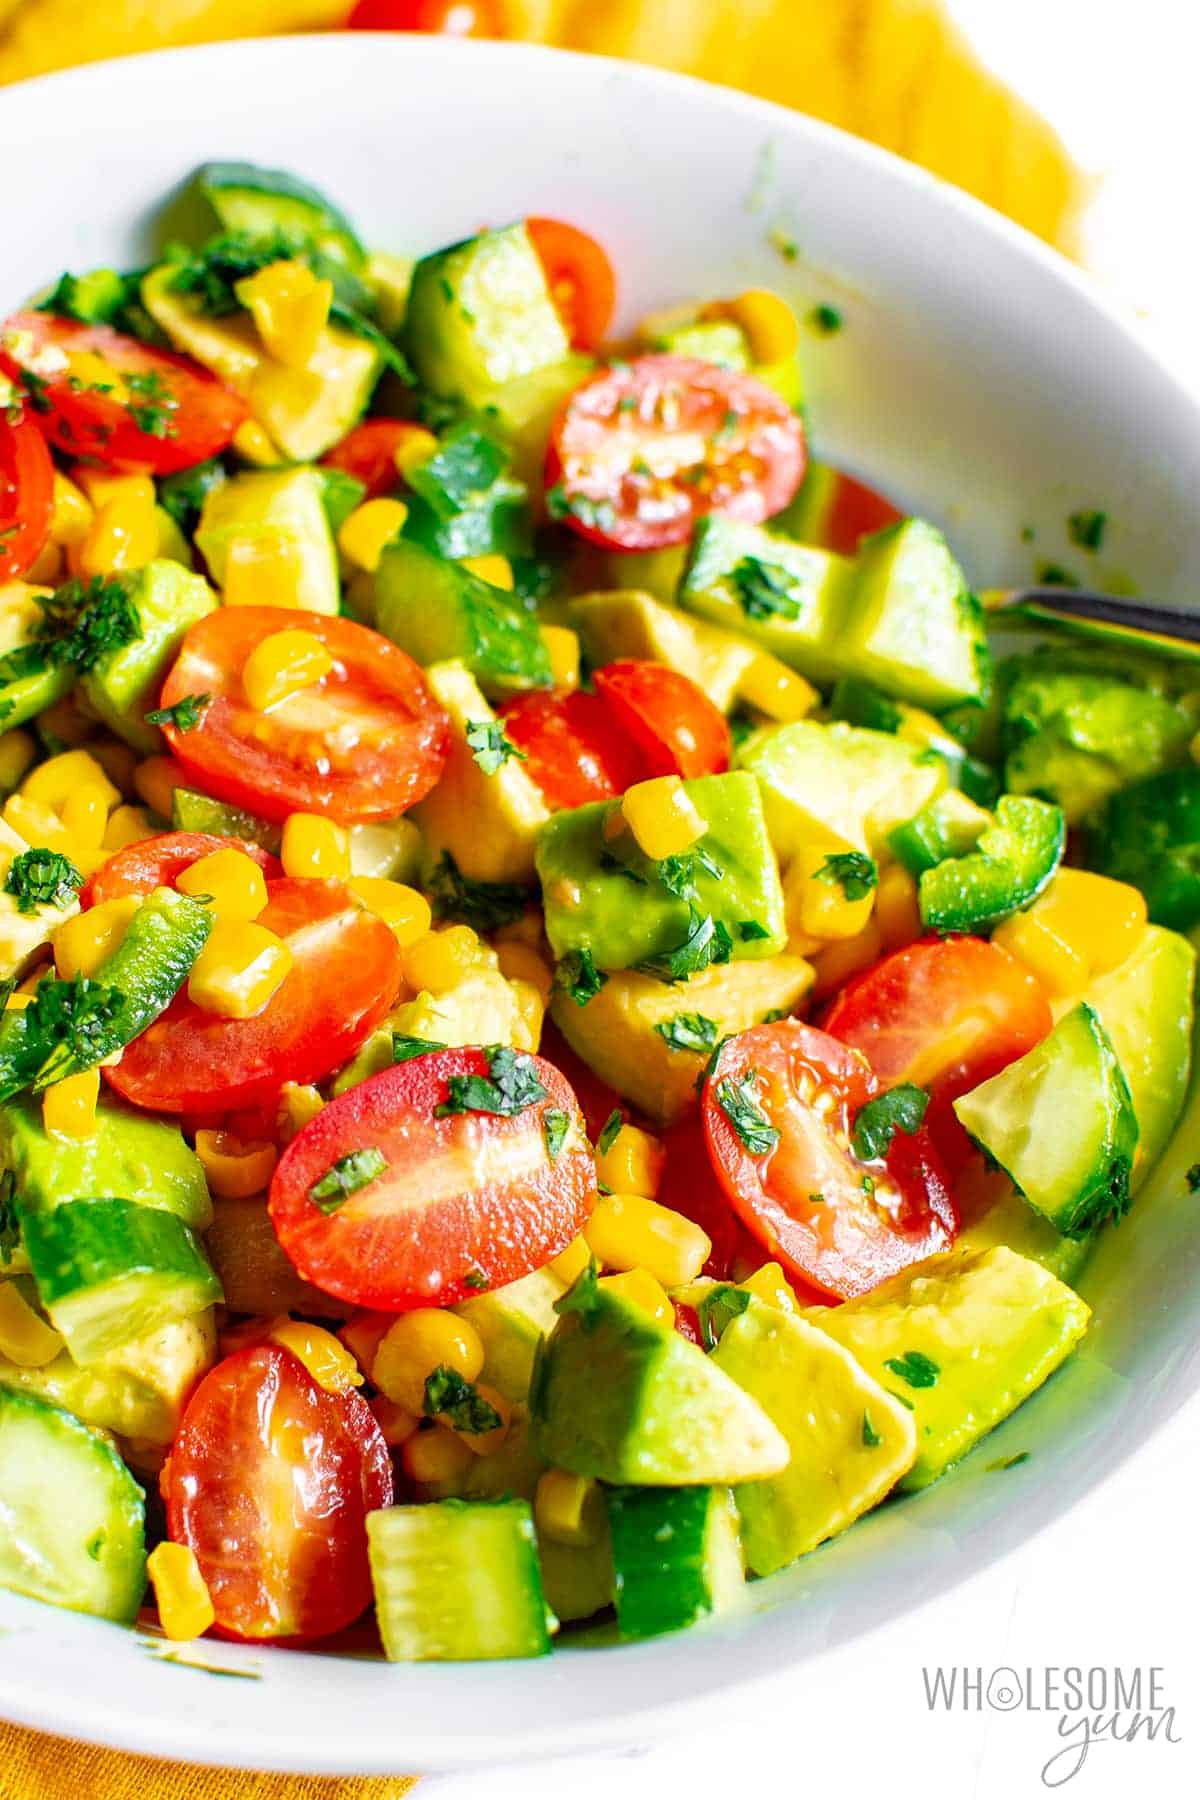 Complete the Fresh Avocado Corn Salad in a bowl.